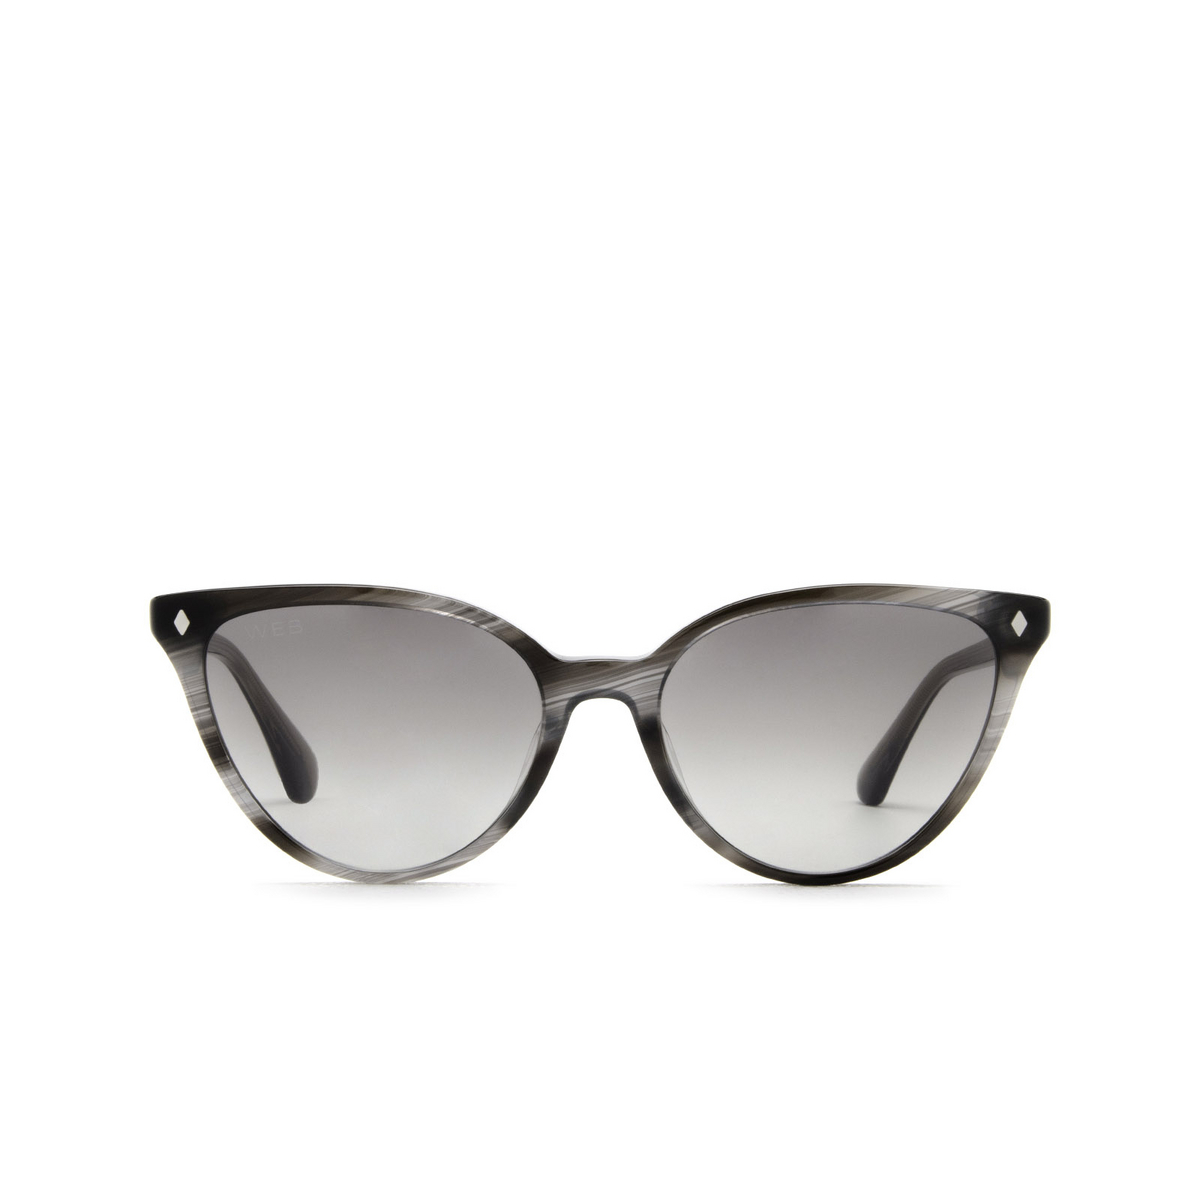 Web® Cat-eye Sunglasses: WE0329 color 05B Grey - front view